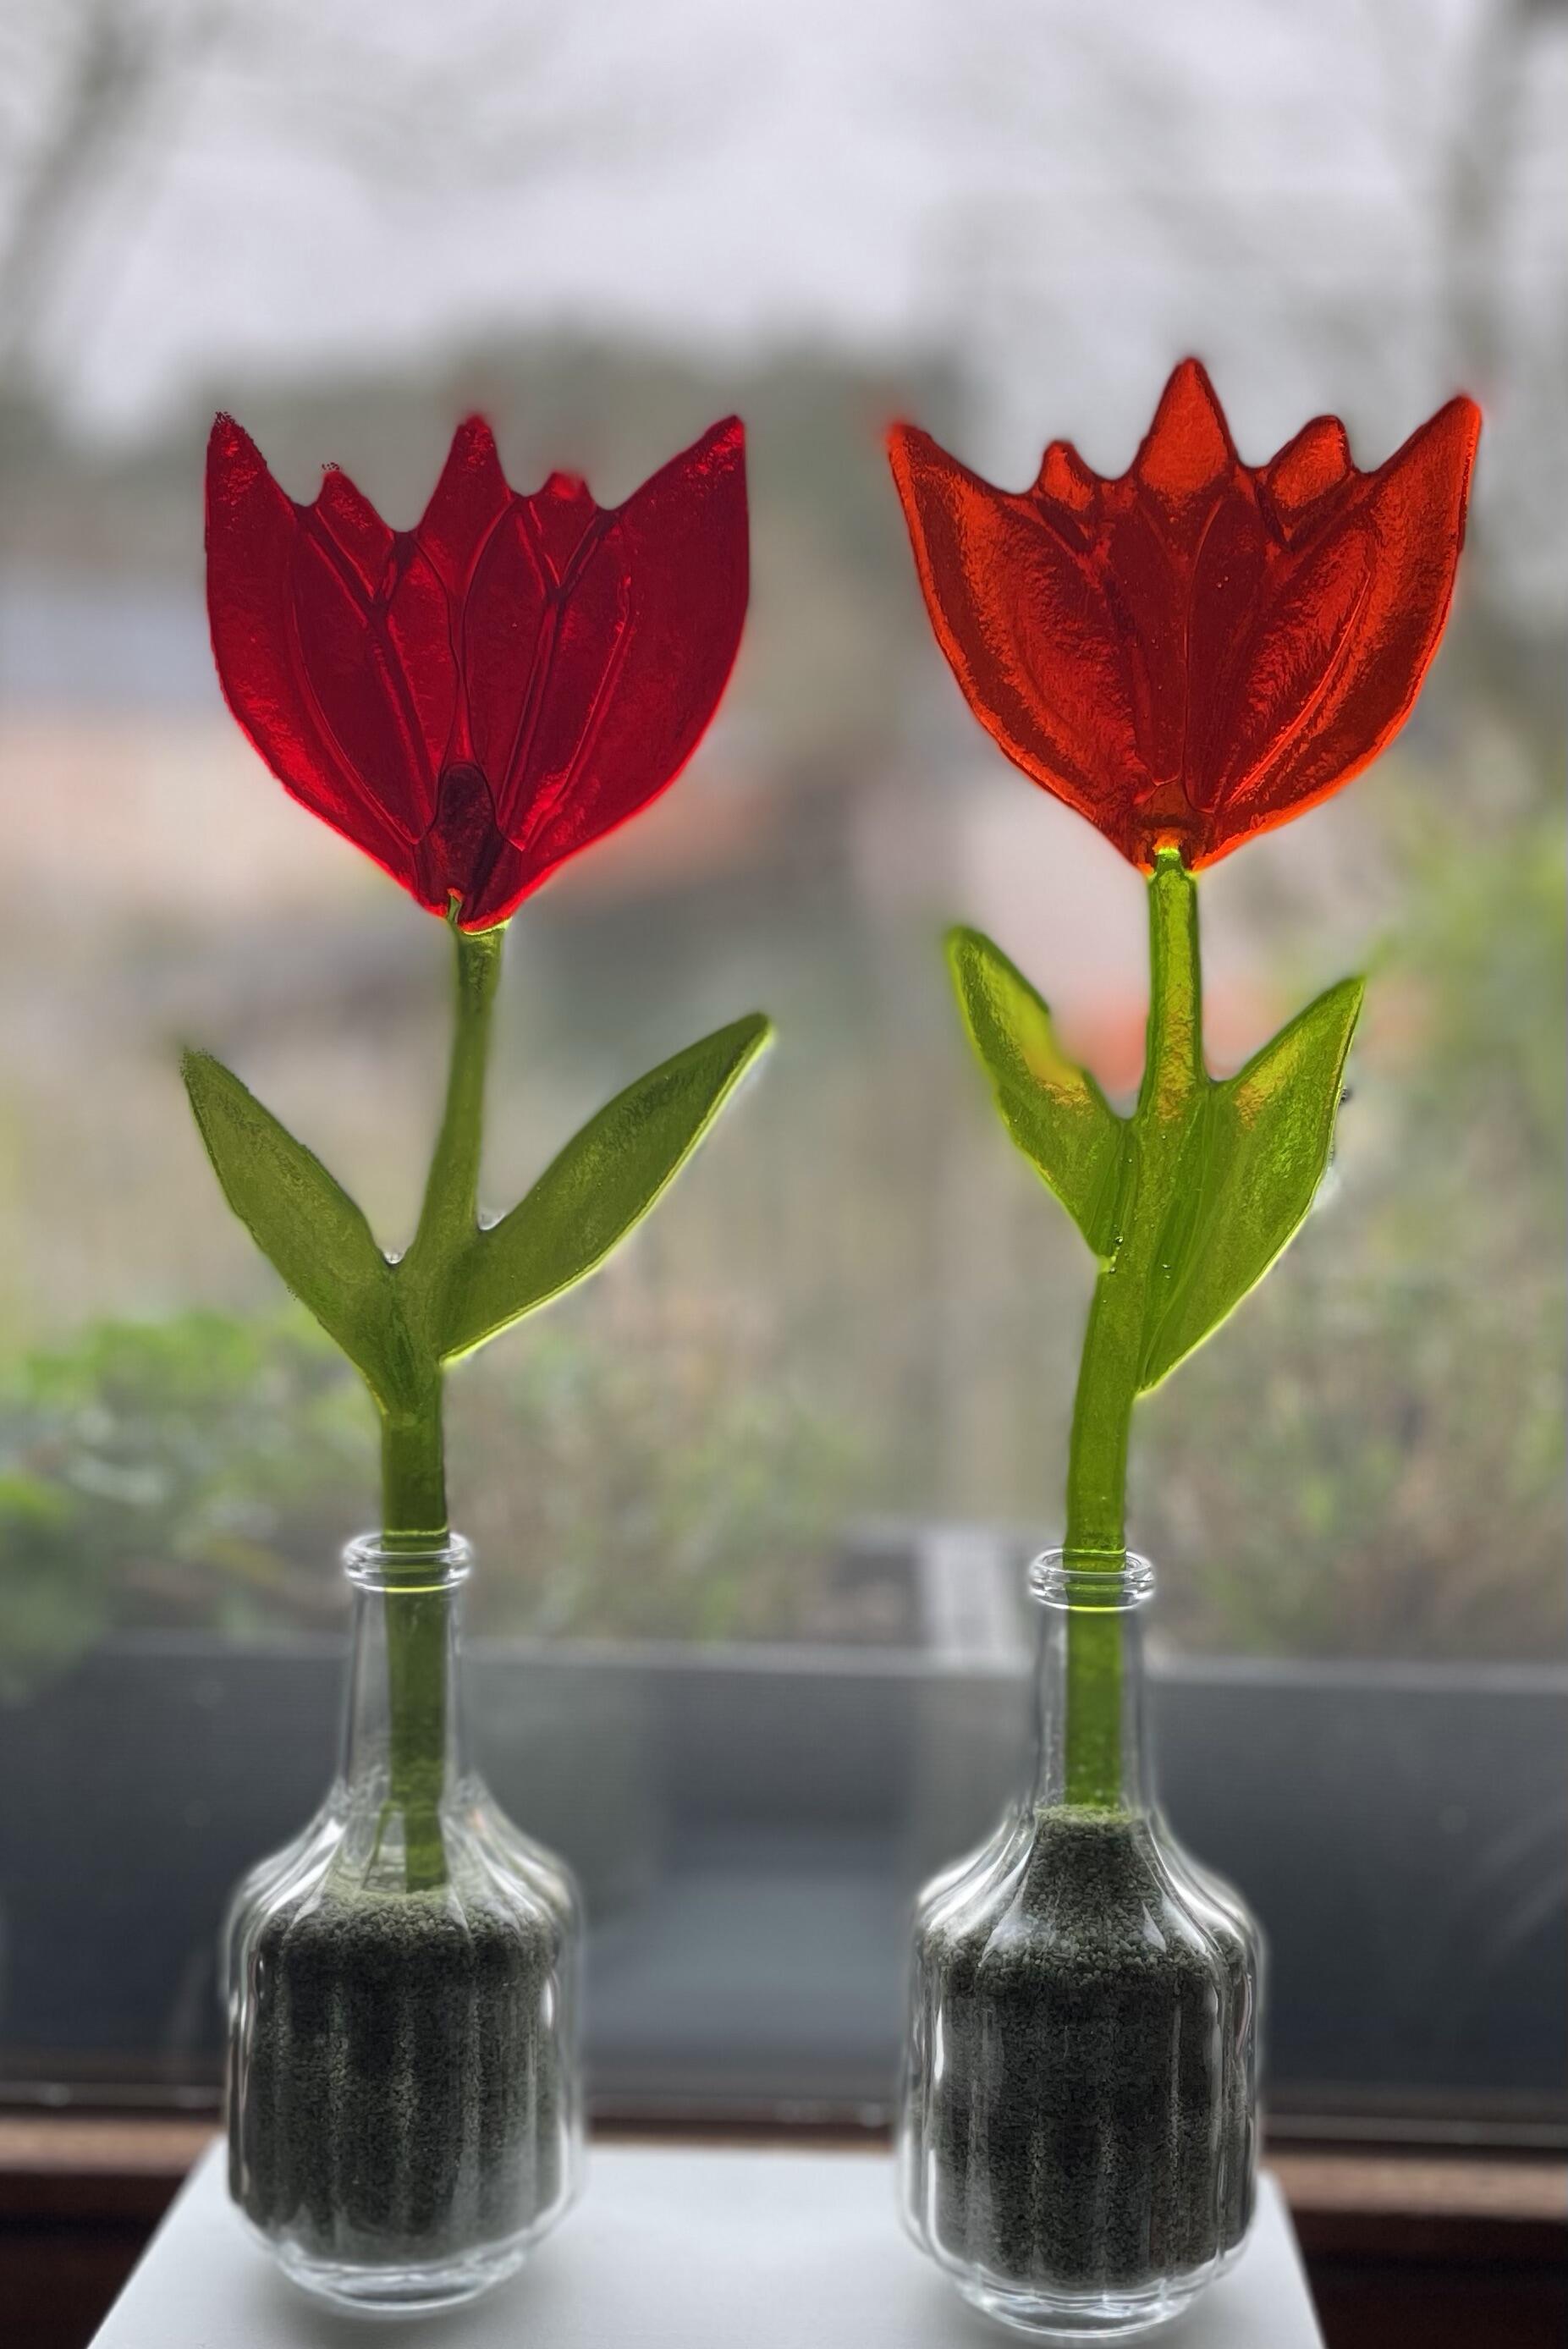 Tulips that never fade, handmade from glass, red